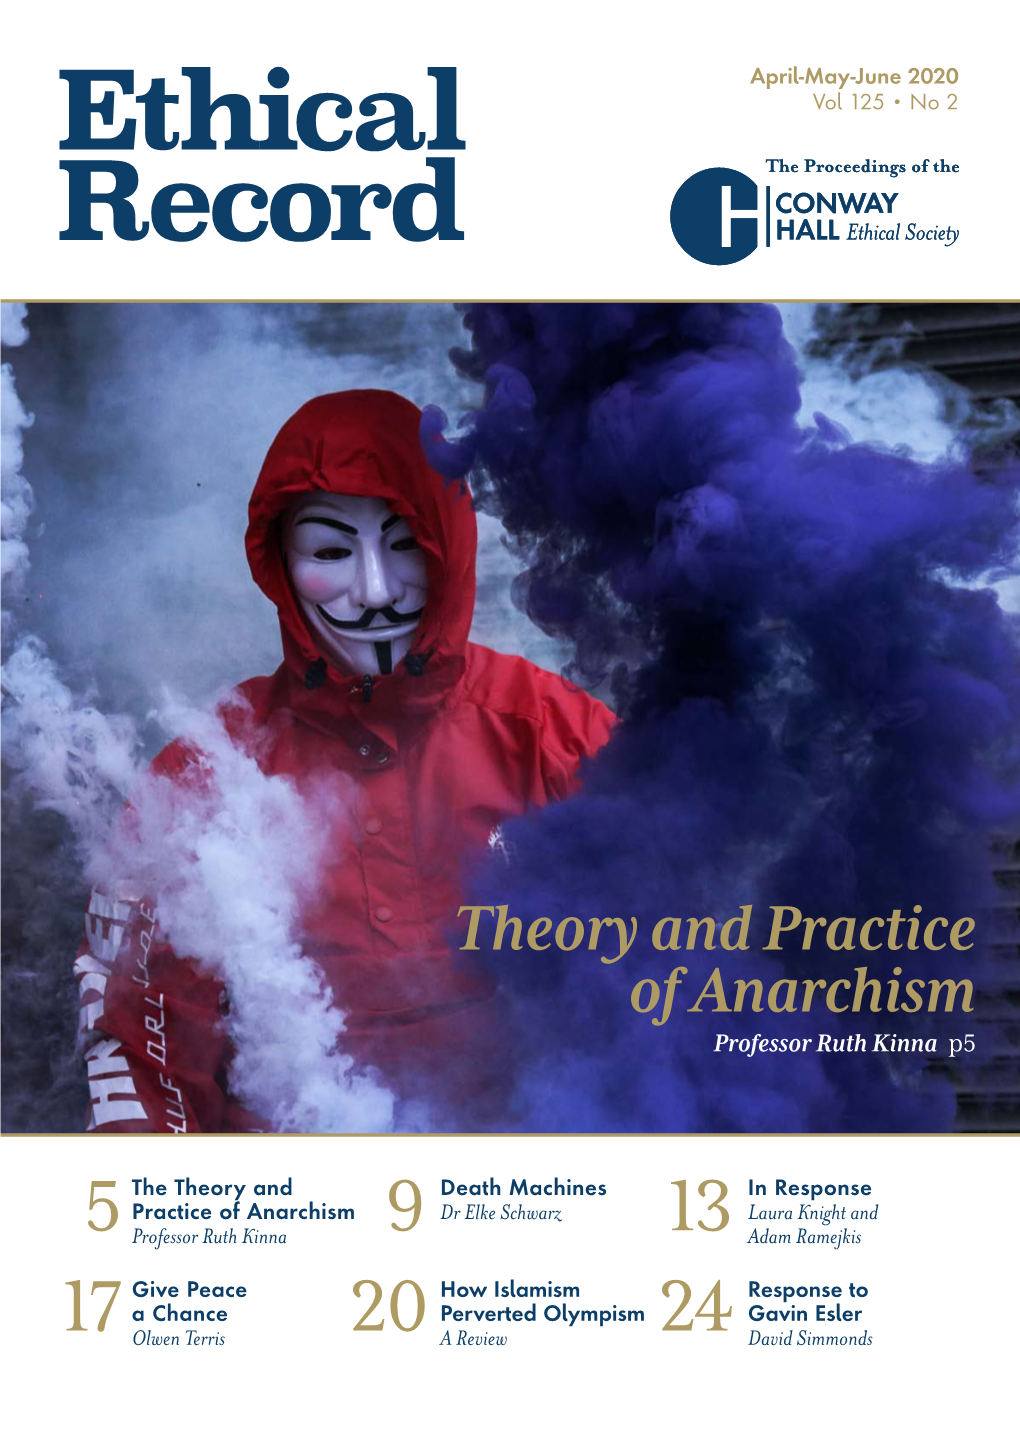 Theory and Practice of Anarchism Professor Ruth Kinna P5